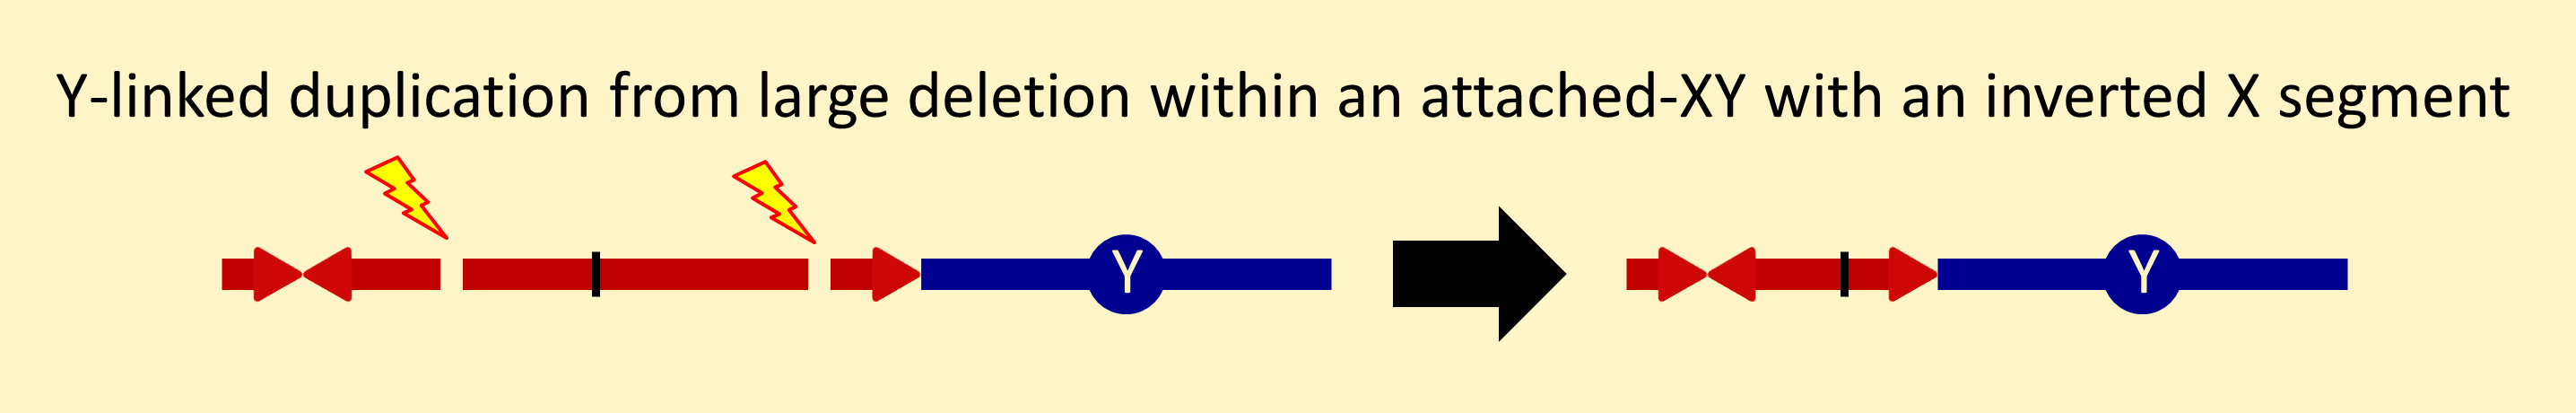 Y-linked duplication from a deletion within an attached-XY carrying an inversion